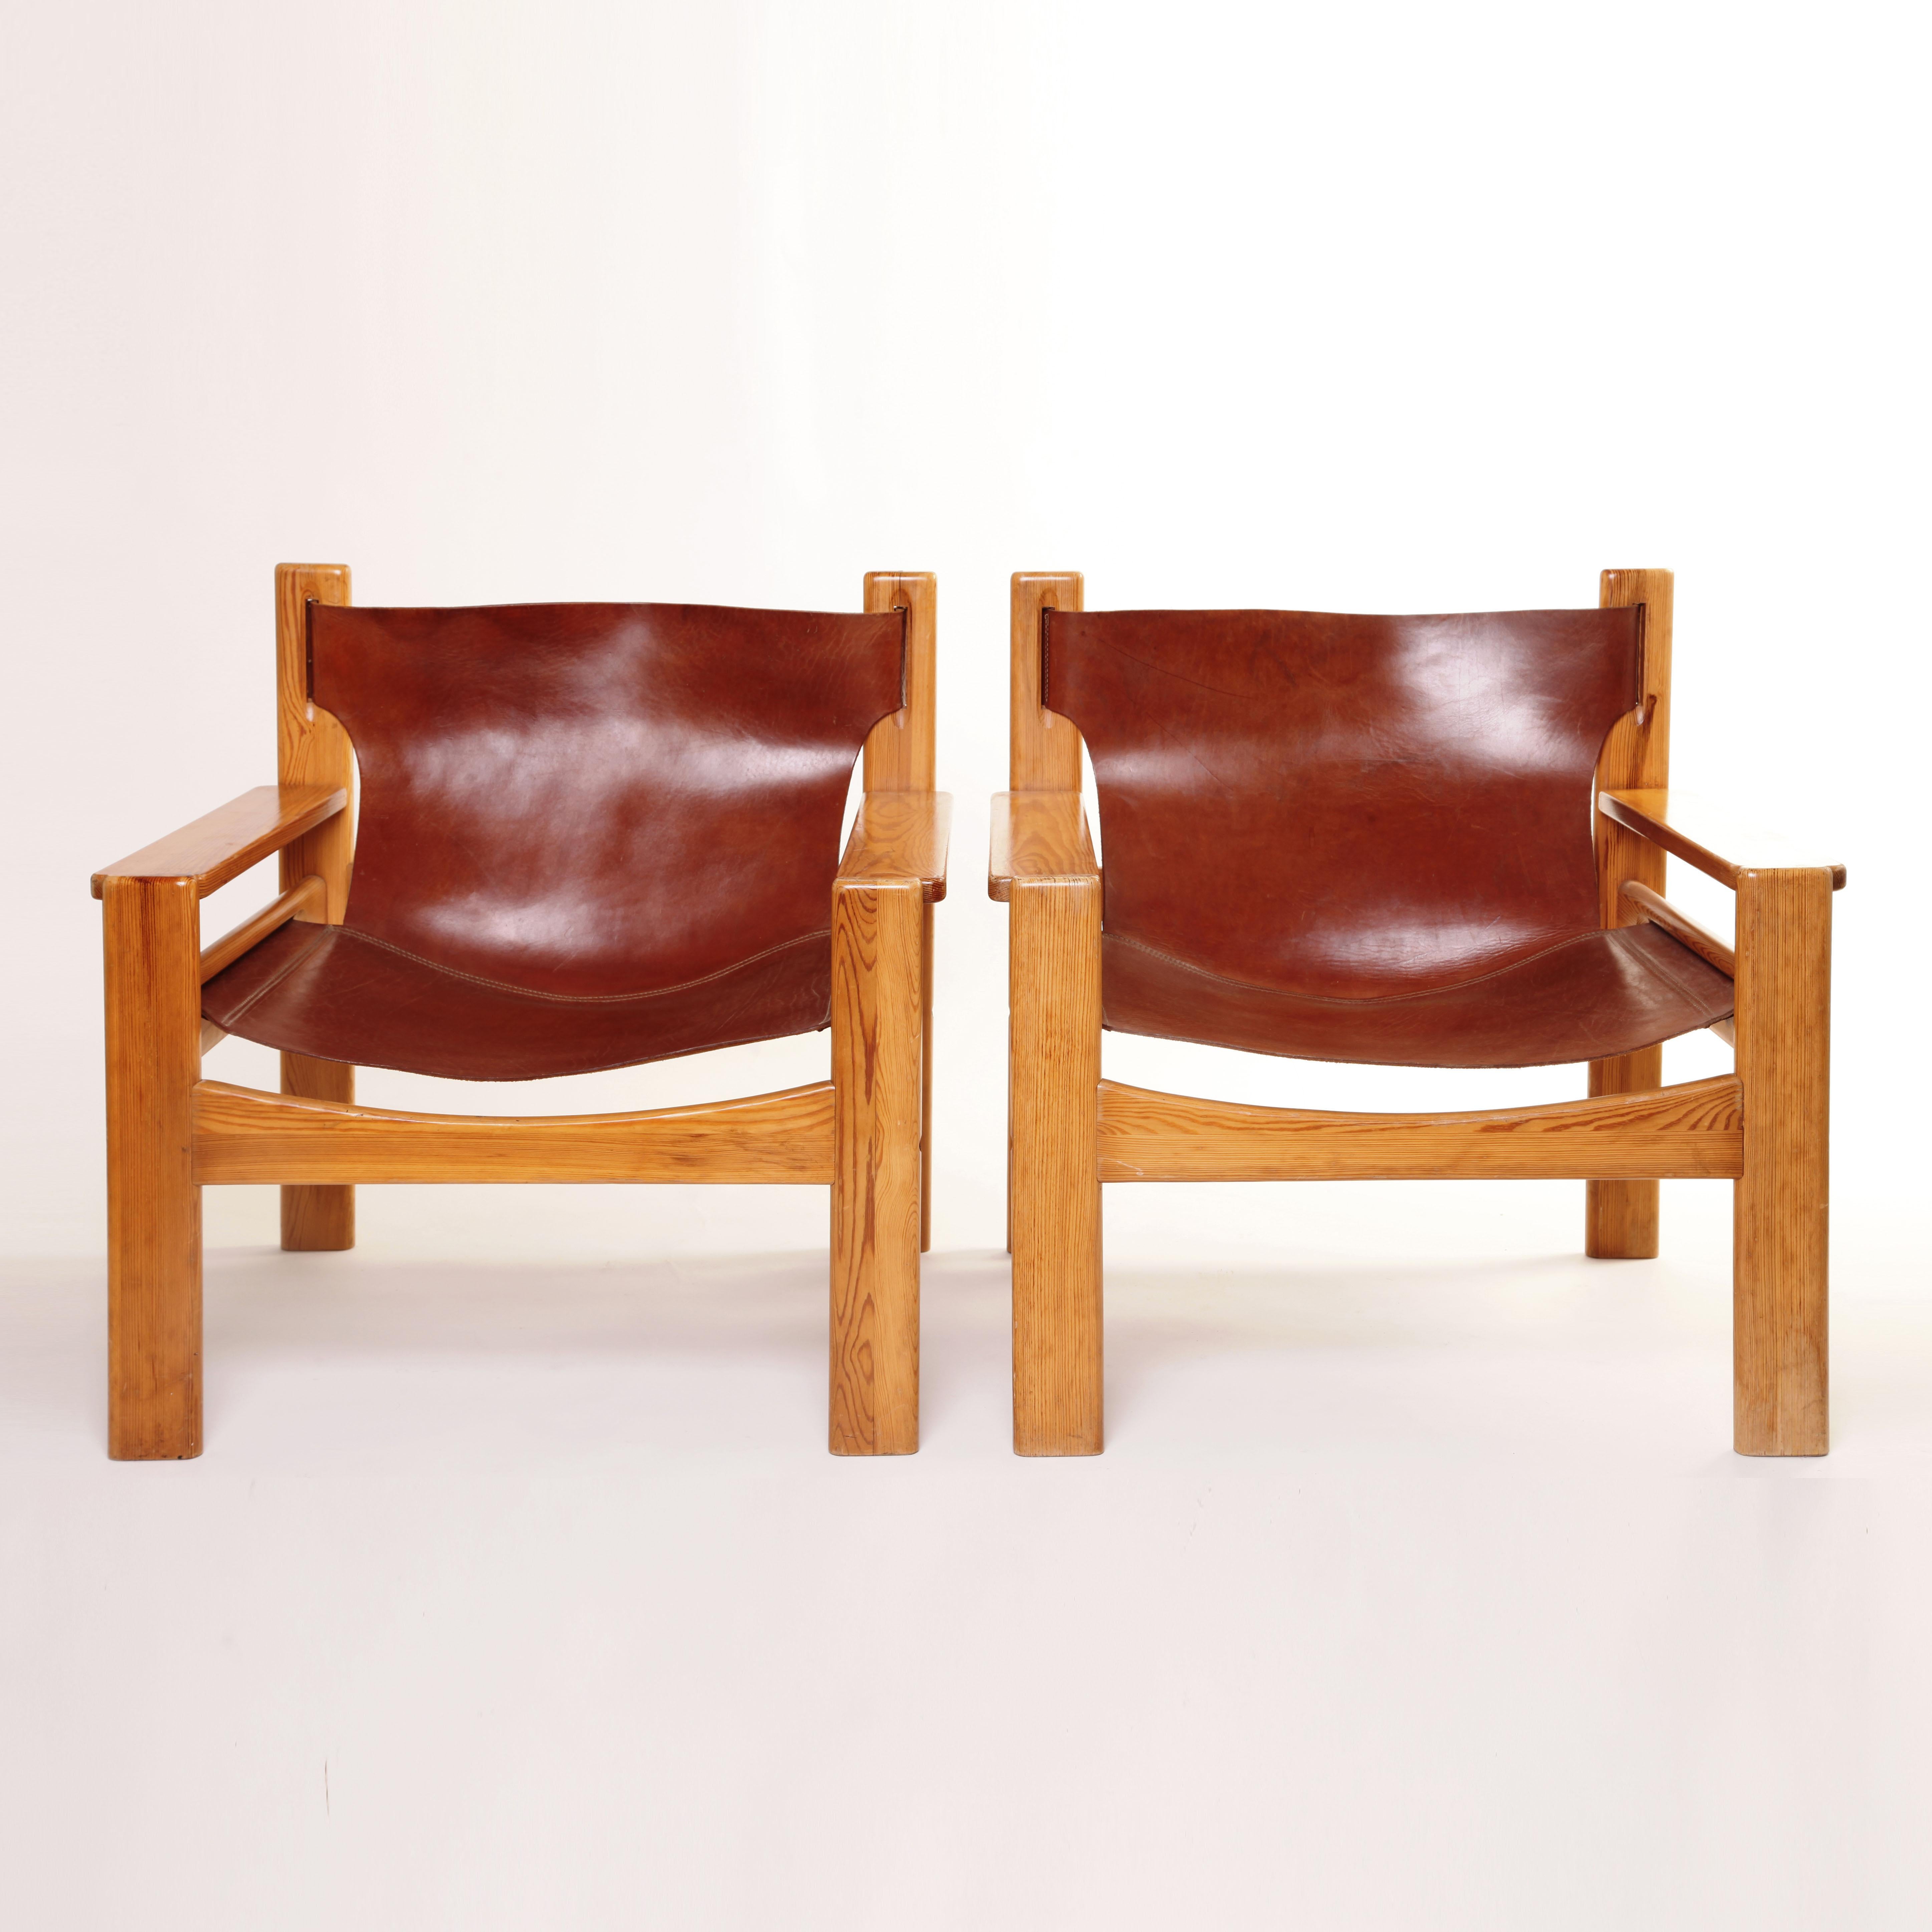 A unique pair of Børge Mogensen lounge armchairs. Sling Spanish style tan saddle leather on blond oak. Some wear, occasional scratches, fading or discoloration. for international shipping quotes please ask.